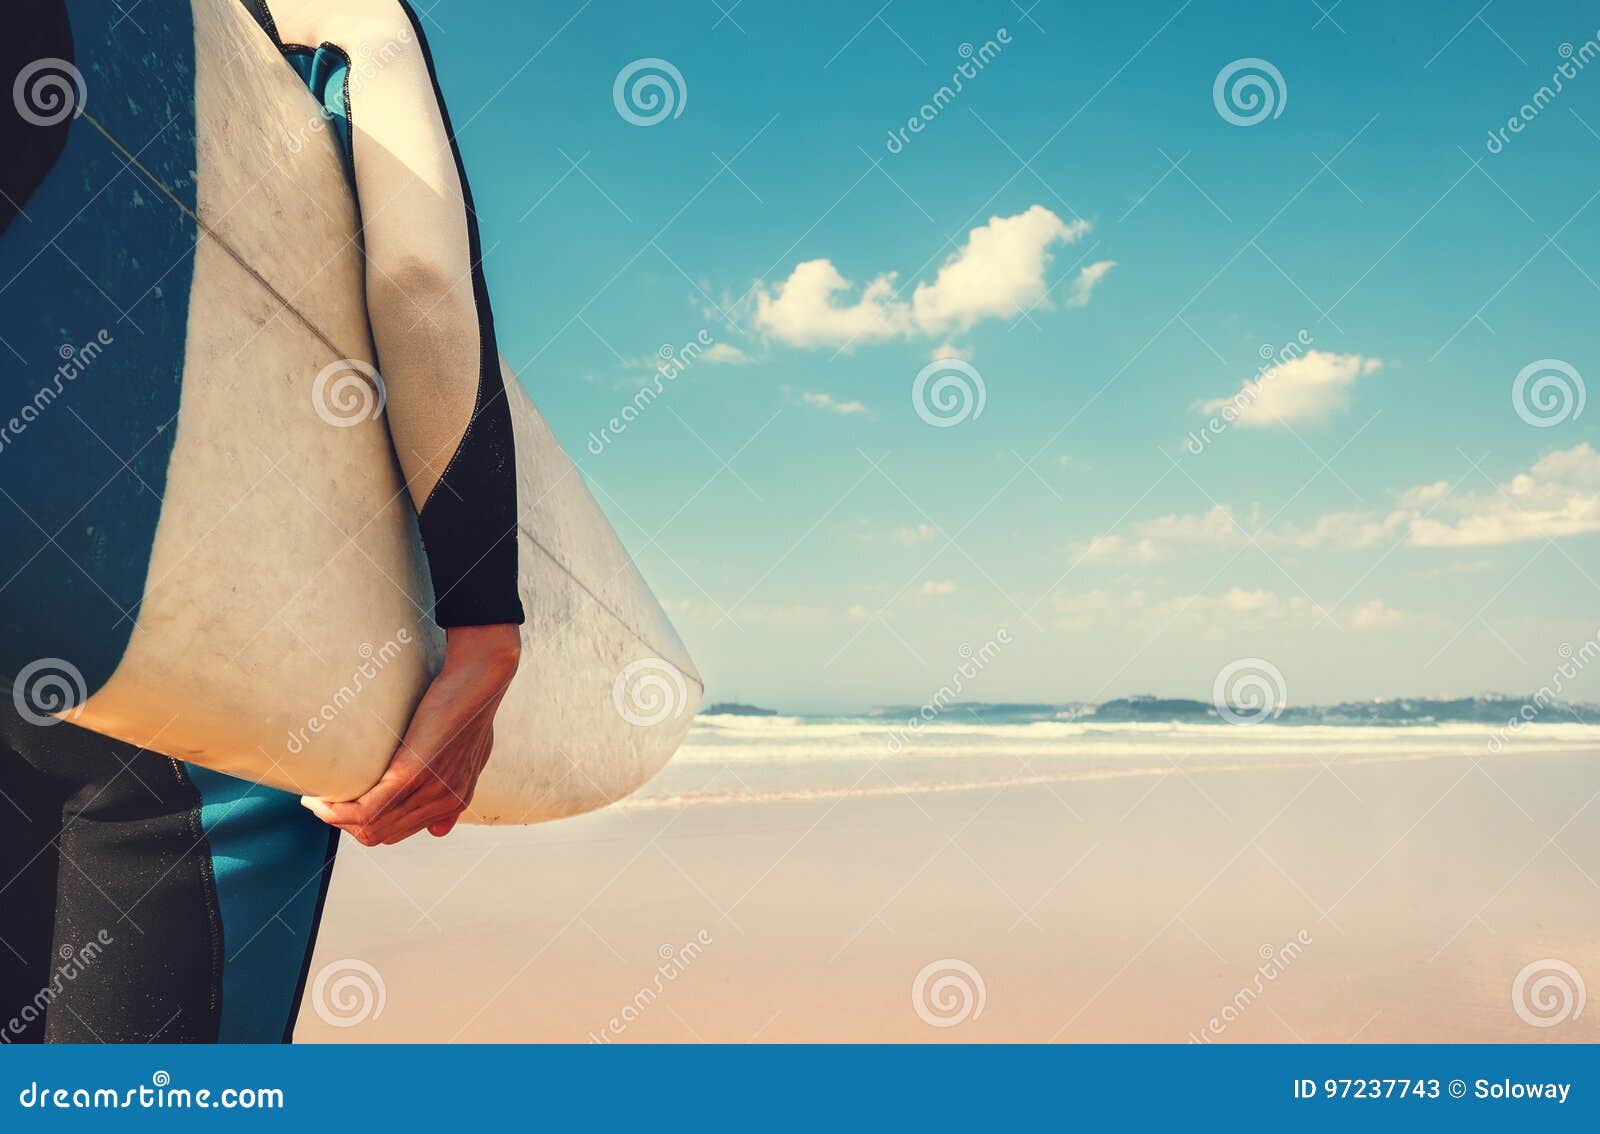 surf board in surfer`s hand close up image with oceans waves vie